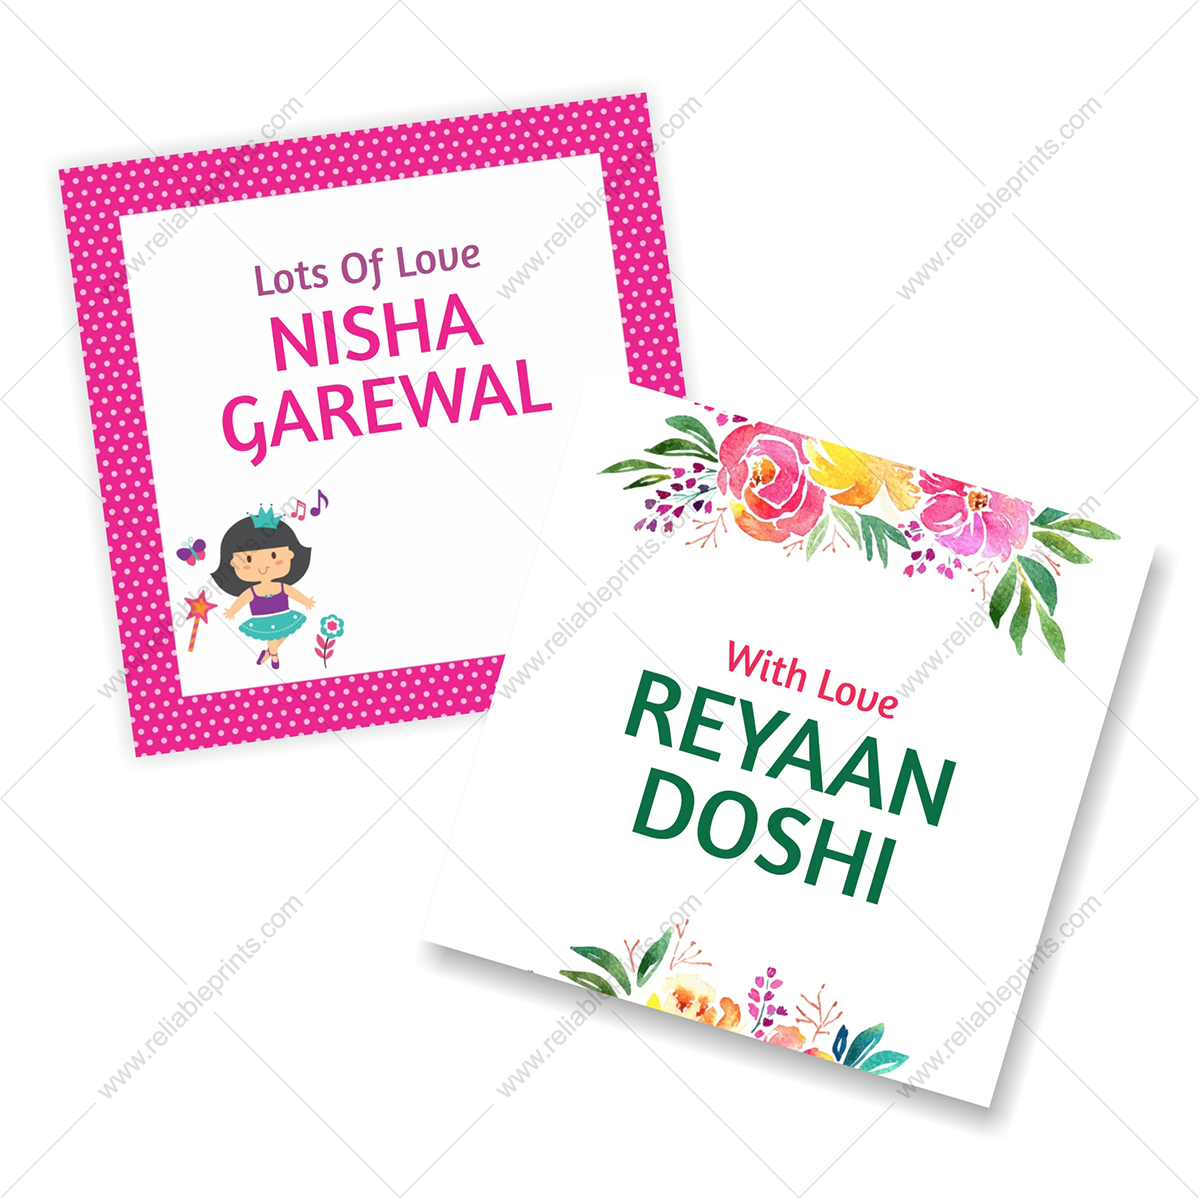 Gift Tags Online India - Personalized Gift Tags Printing